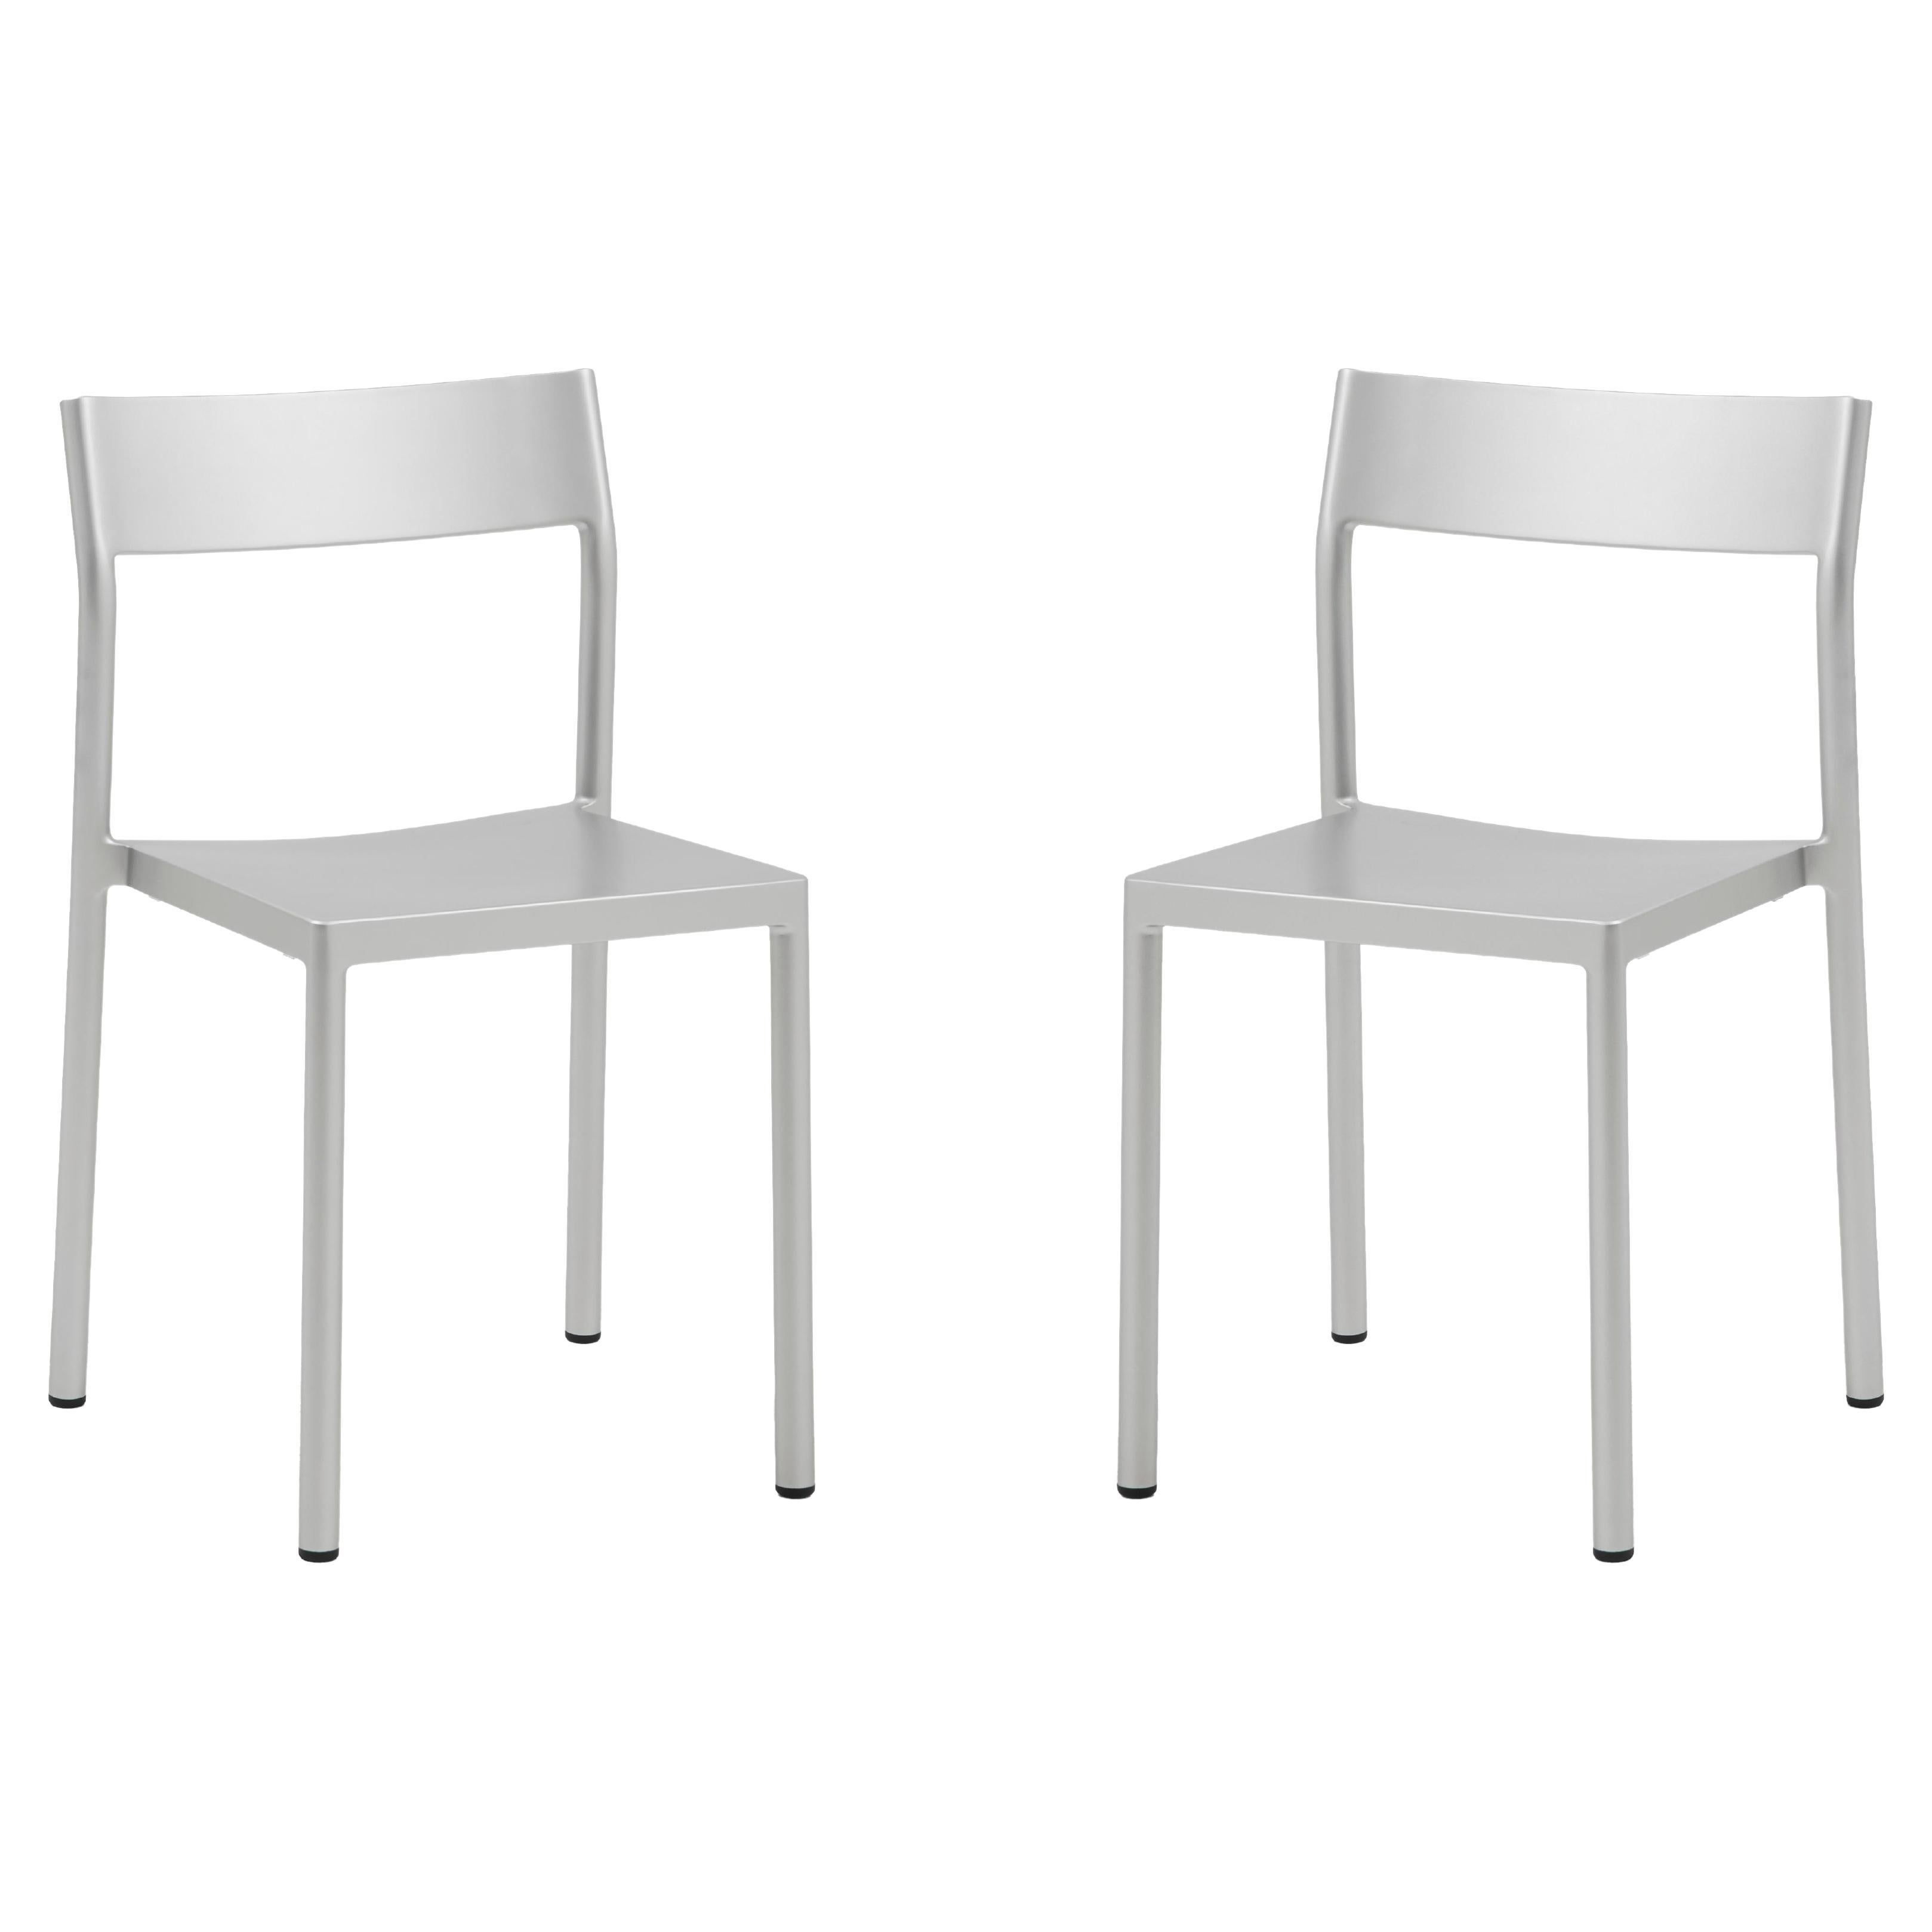 Pair of Type Chairs in Aluminum, by Jonas Trampedach for Hay 